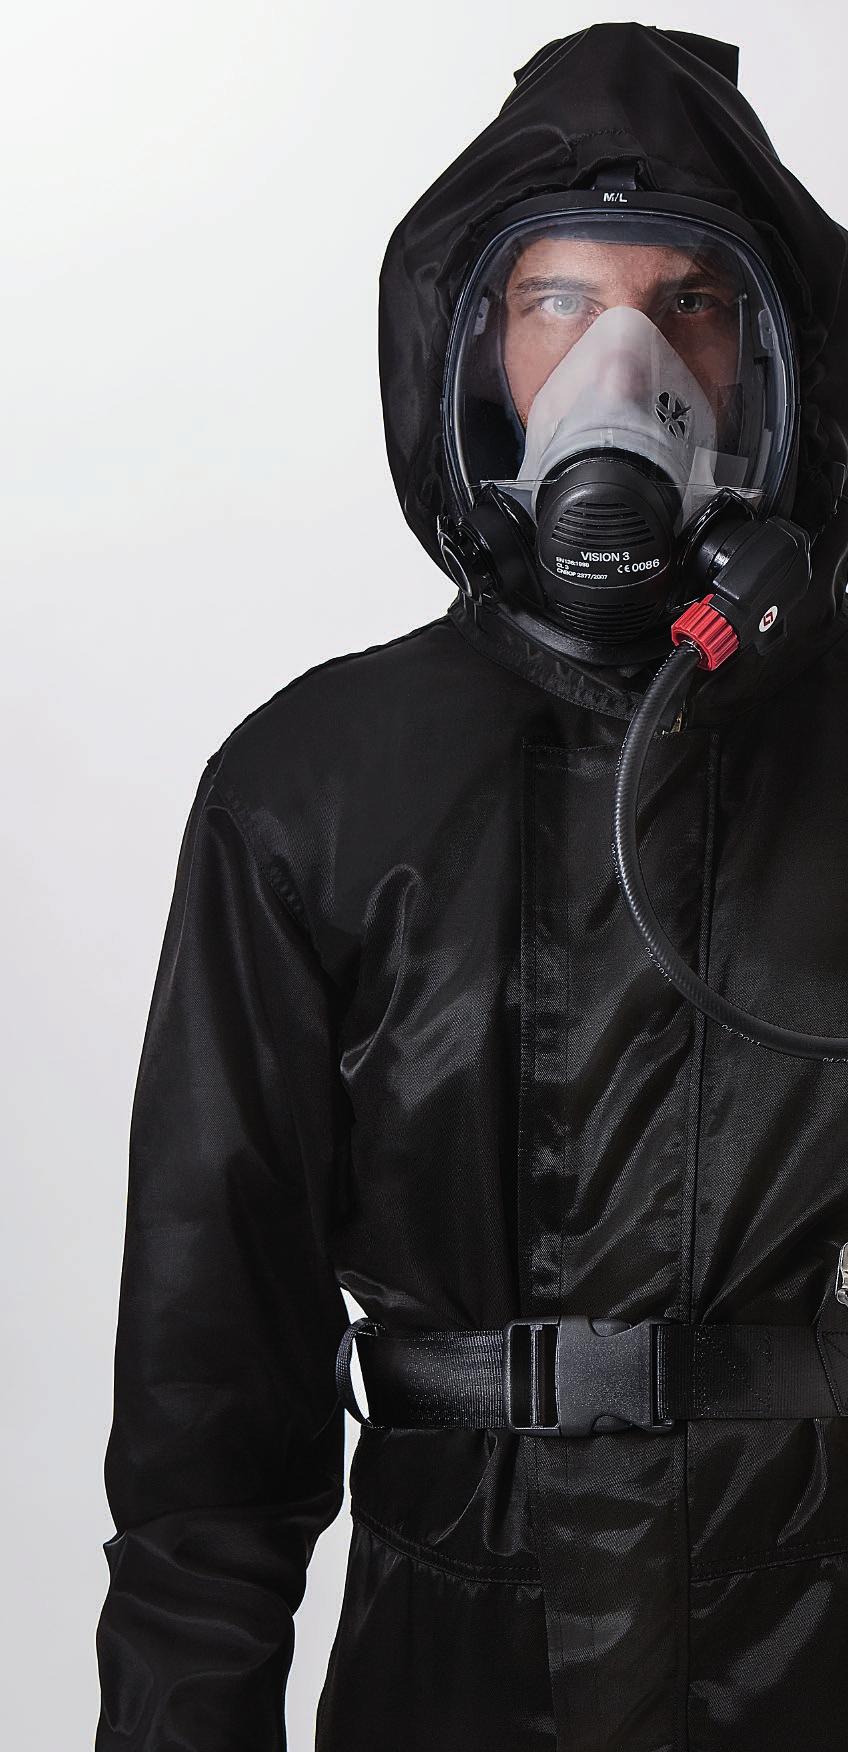 The standard specifies the minimum requirements for chemical protective clothing resistant to penetration by airborne solid particles.